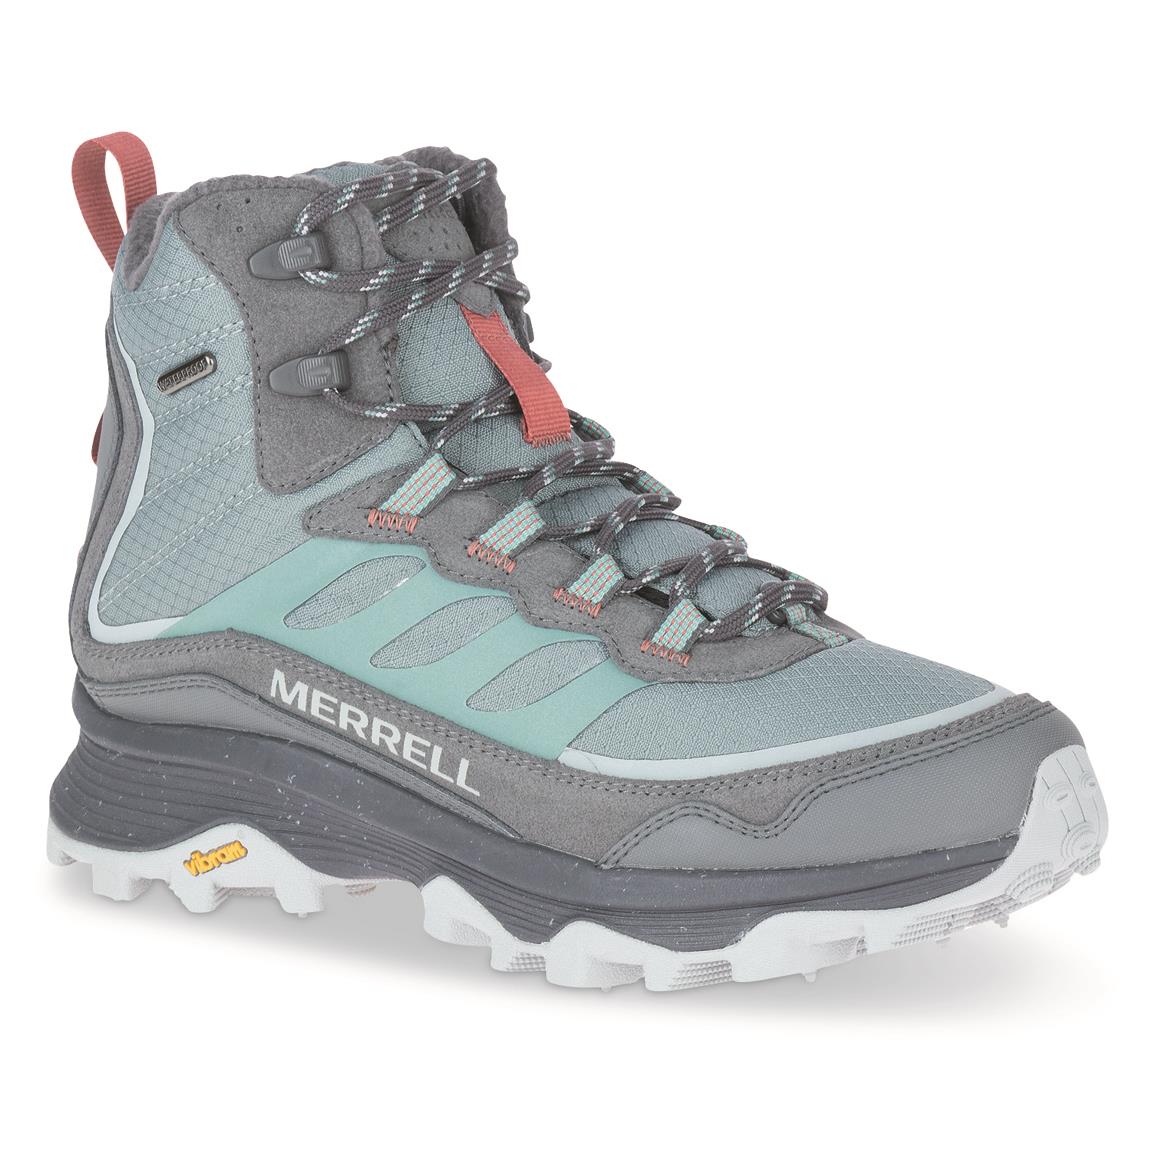 Merrell Women's Moab Speed Thermo Waterproof Insulated Hiking Boots, 200 Grams, Monument